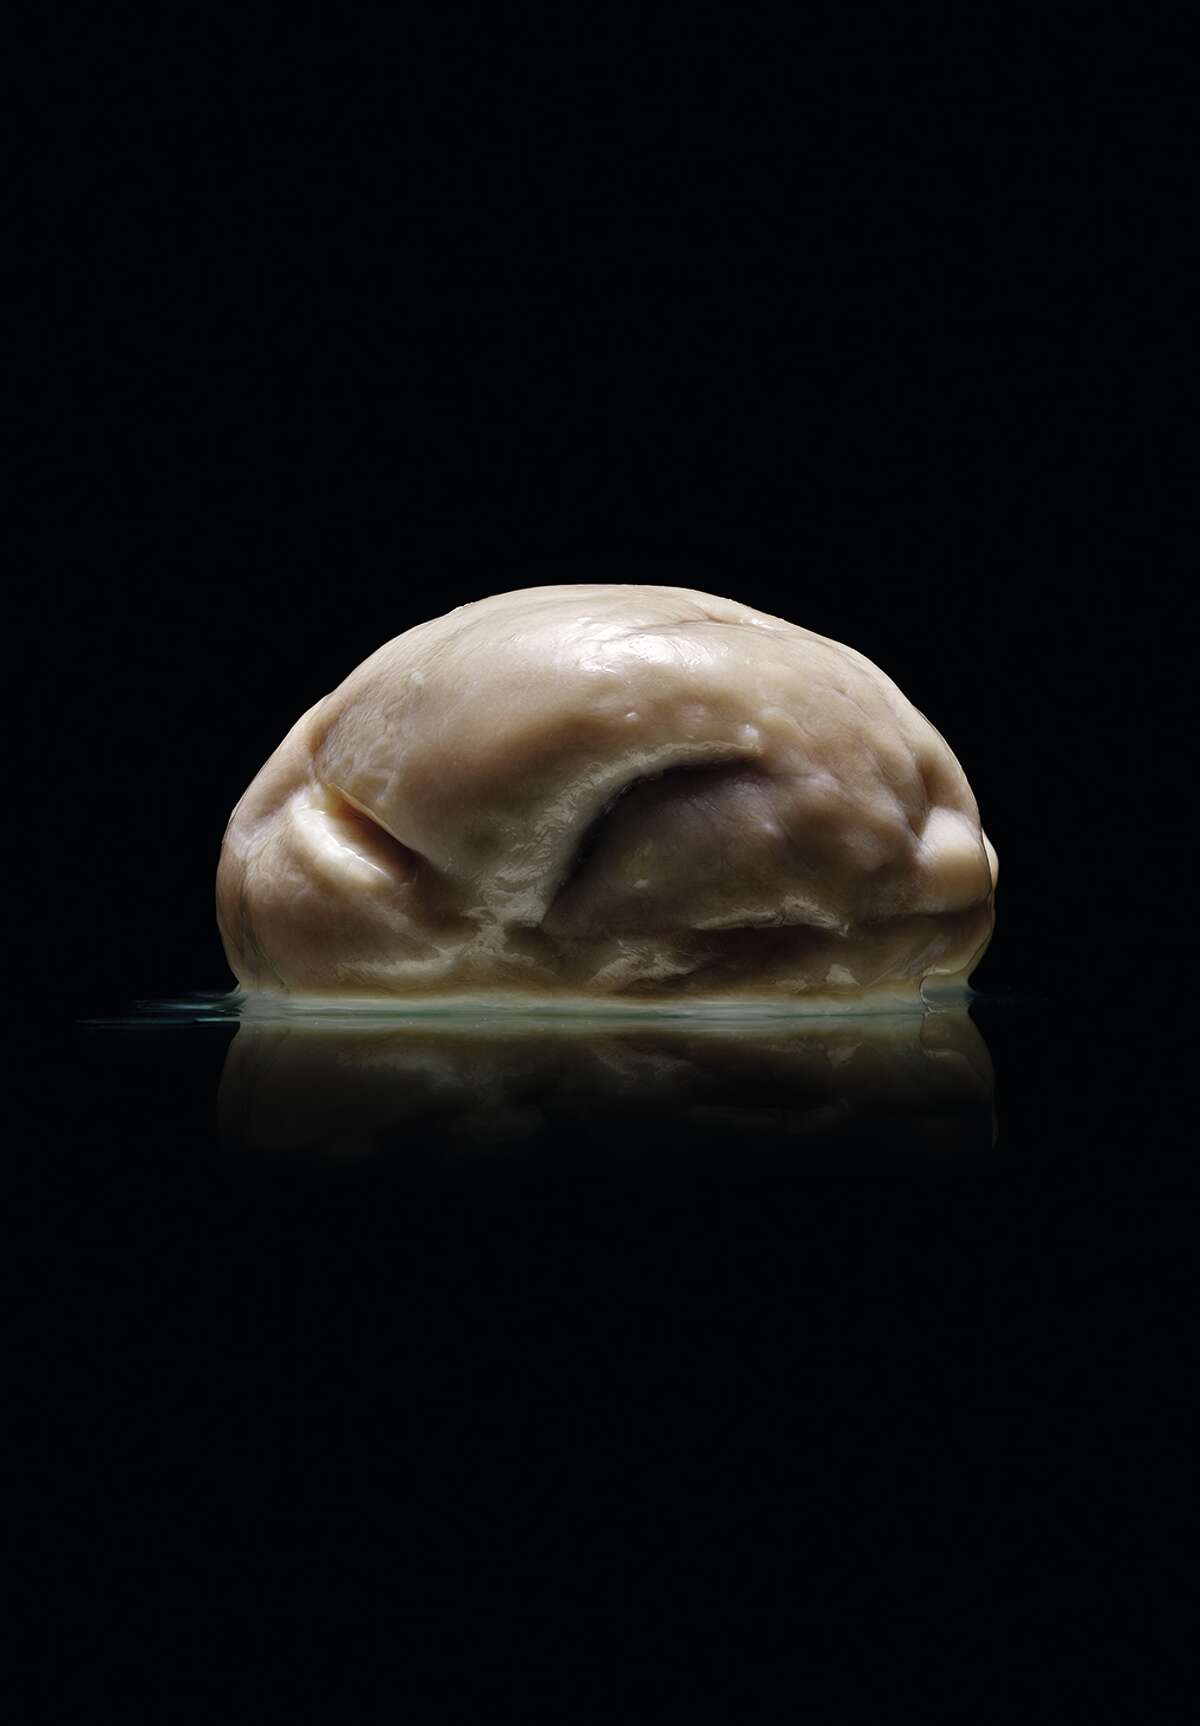 "Malformed: Forgotten Brains of the Texas State Mental Hospital" — authored by Austin photographer Adam Voorhes and journalist Alex Hannaford — shows dozens of photographs of brains of former patients treated at the State Lunatic Asylum, now the Austin State Hospital, from 1952 to 1983. Voorhes said he and Robin Finlay, Voorhes' wife and business partner, discovered the collection — preserved in formaldehyde in several glass containers — at the University of Texas at Austin while on assignment to photograph a different brain in 2011. Pictured, a brain from the collection.